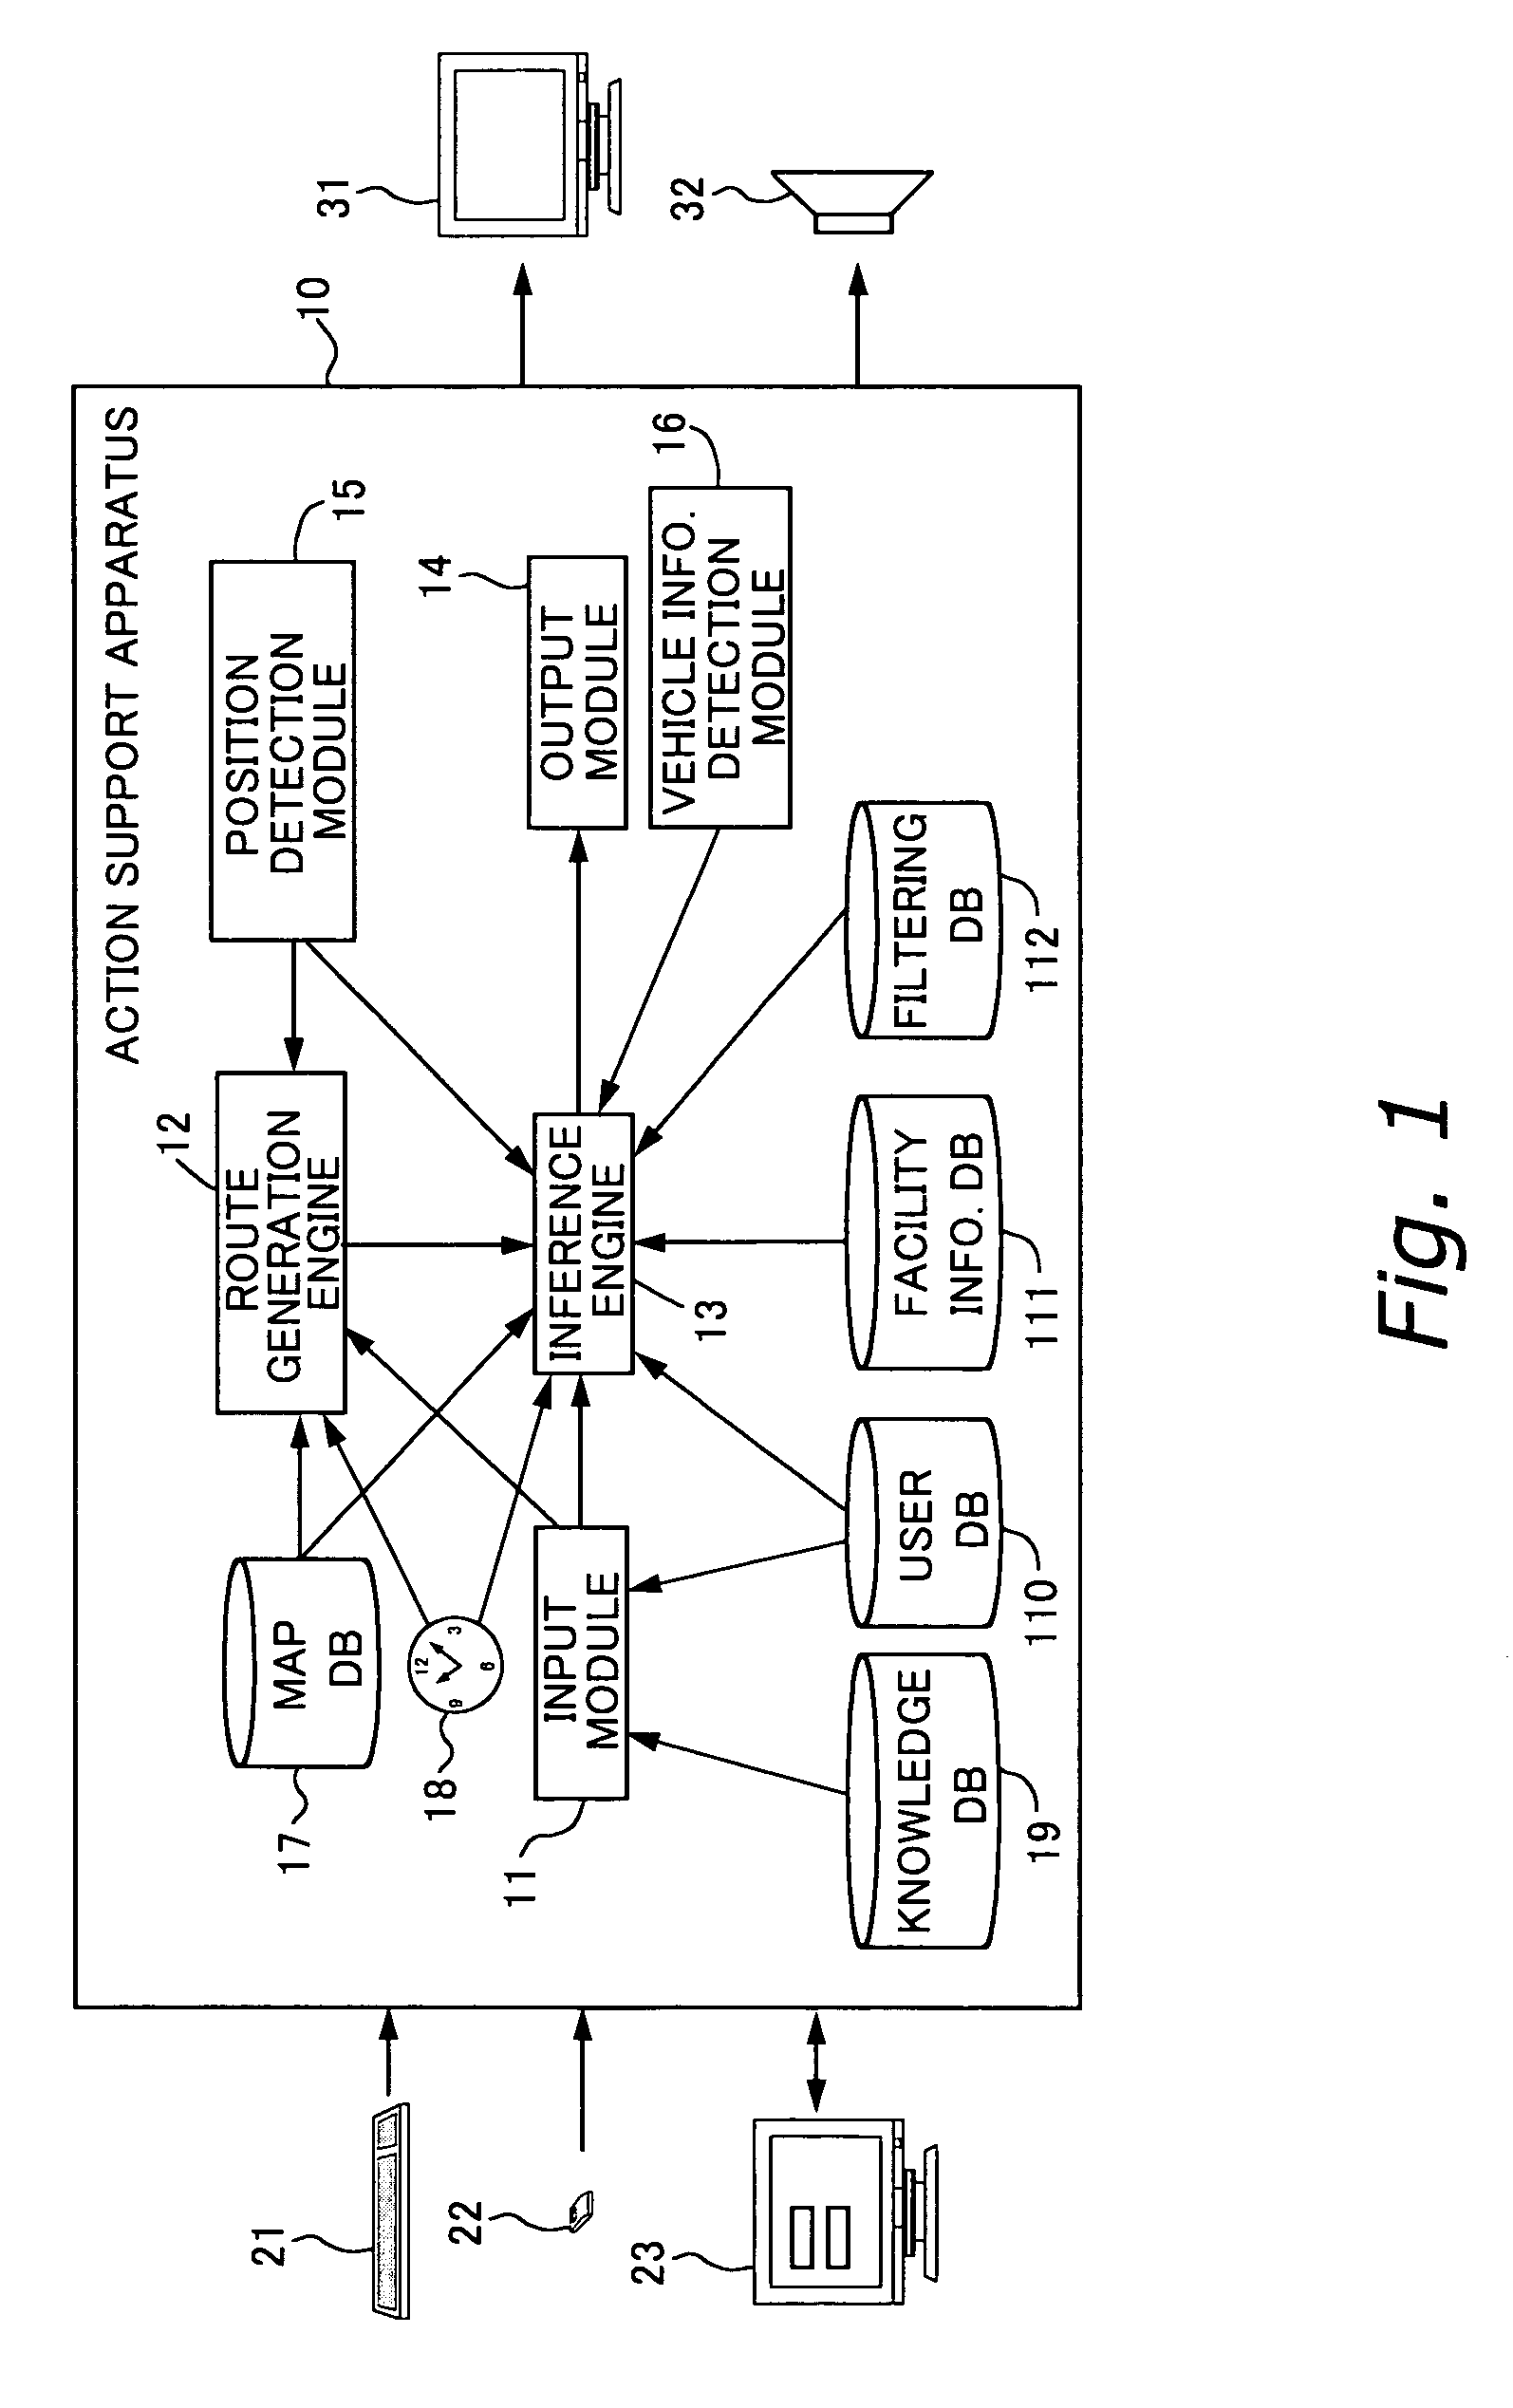 Action support method and apparatus